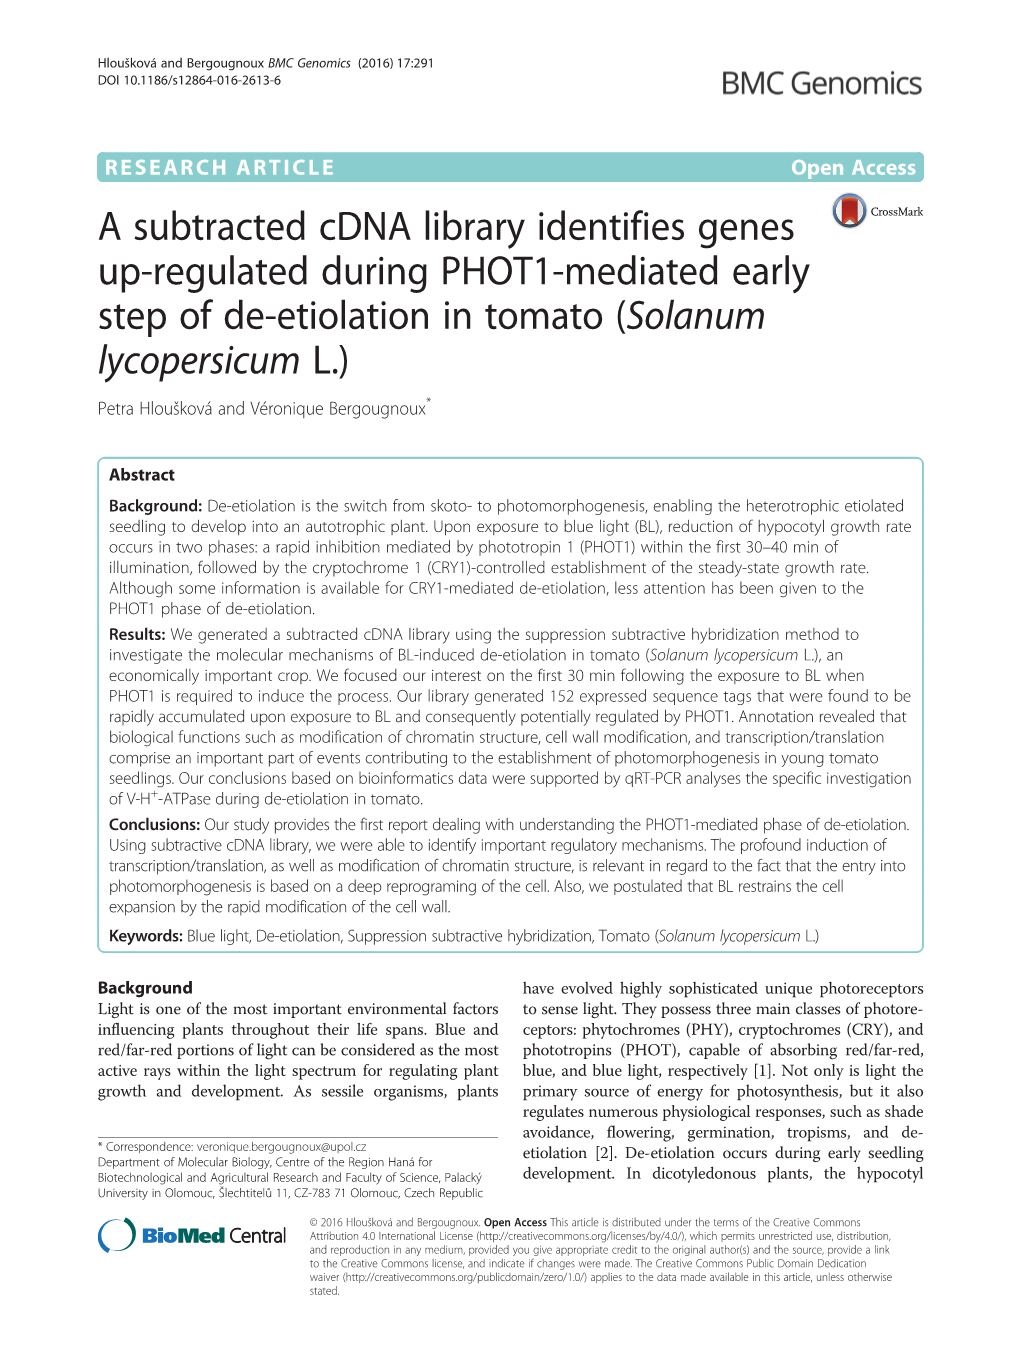 A Subtracted Cdna Library Identifies Genes Up-Regulated During PHOT1